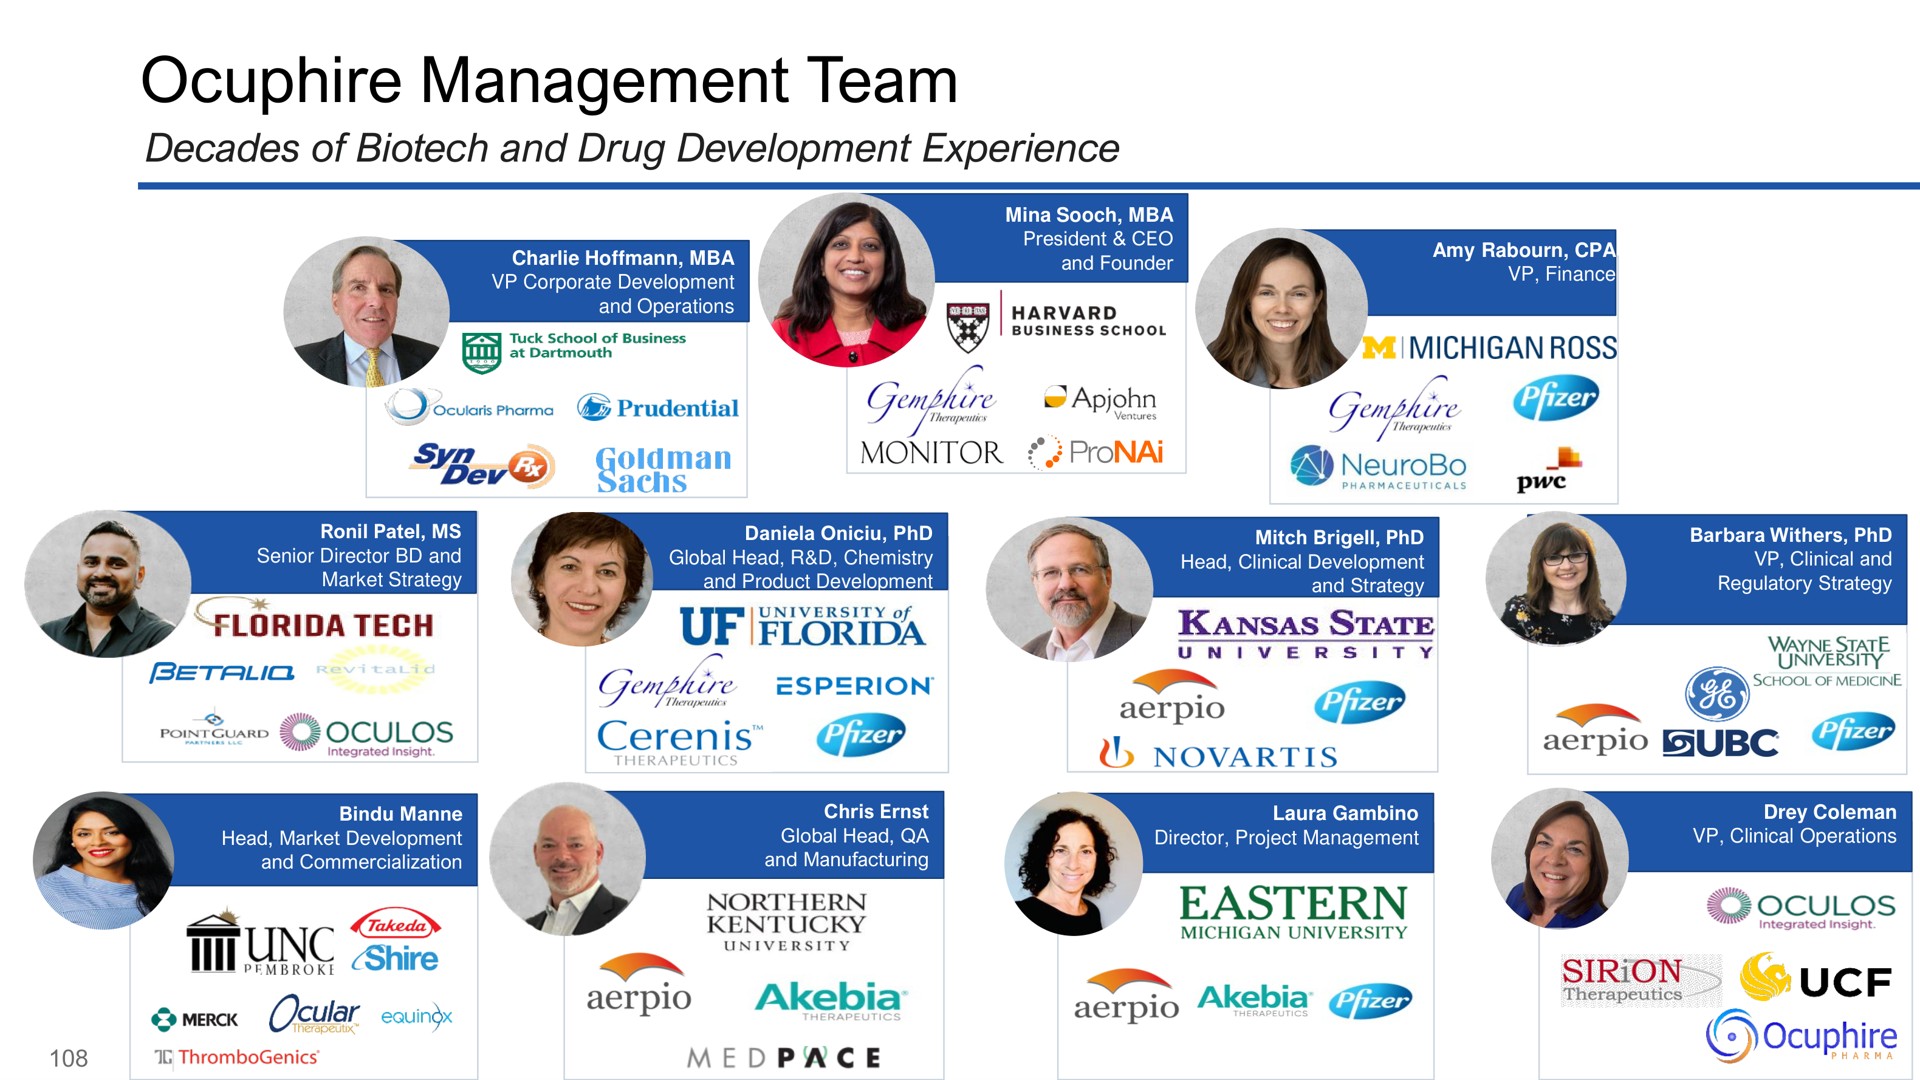 management team page tech a by | Ocuphire Pharma